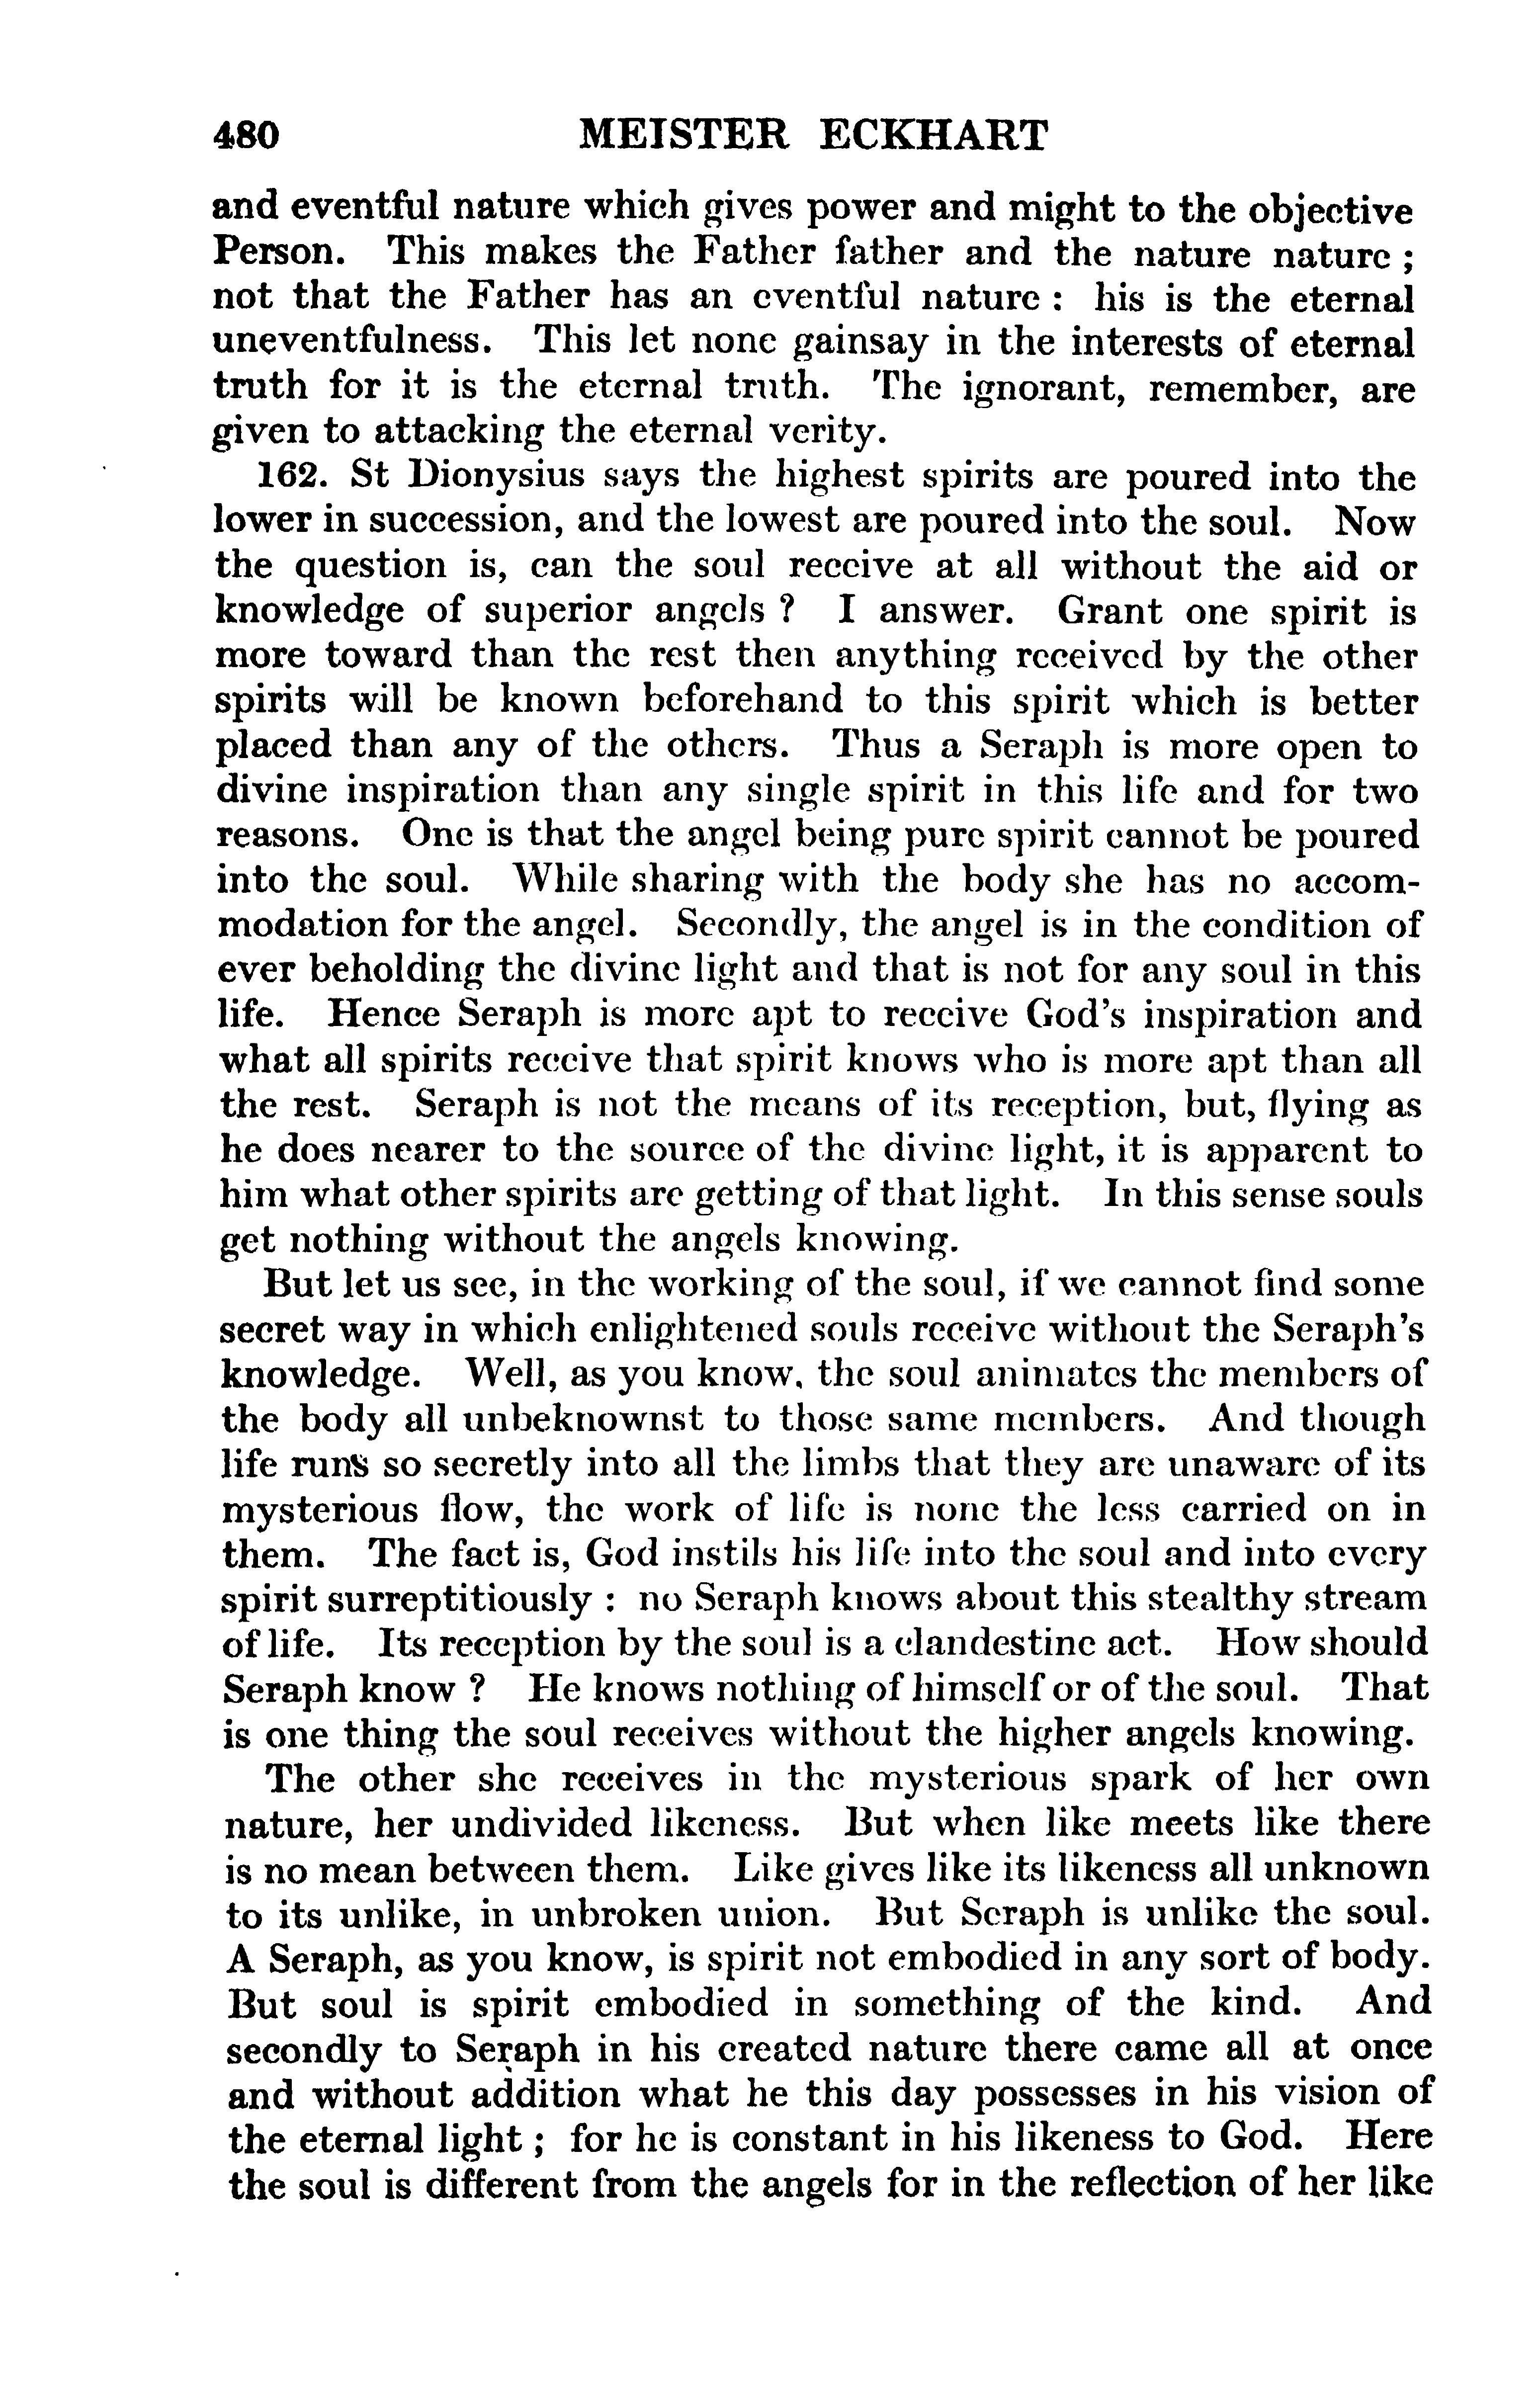 Image of page 0504